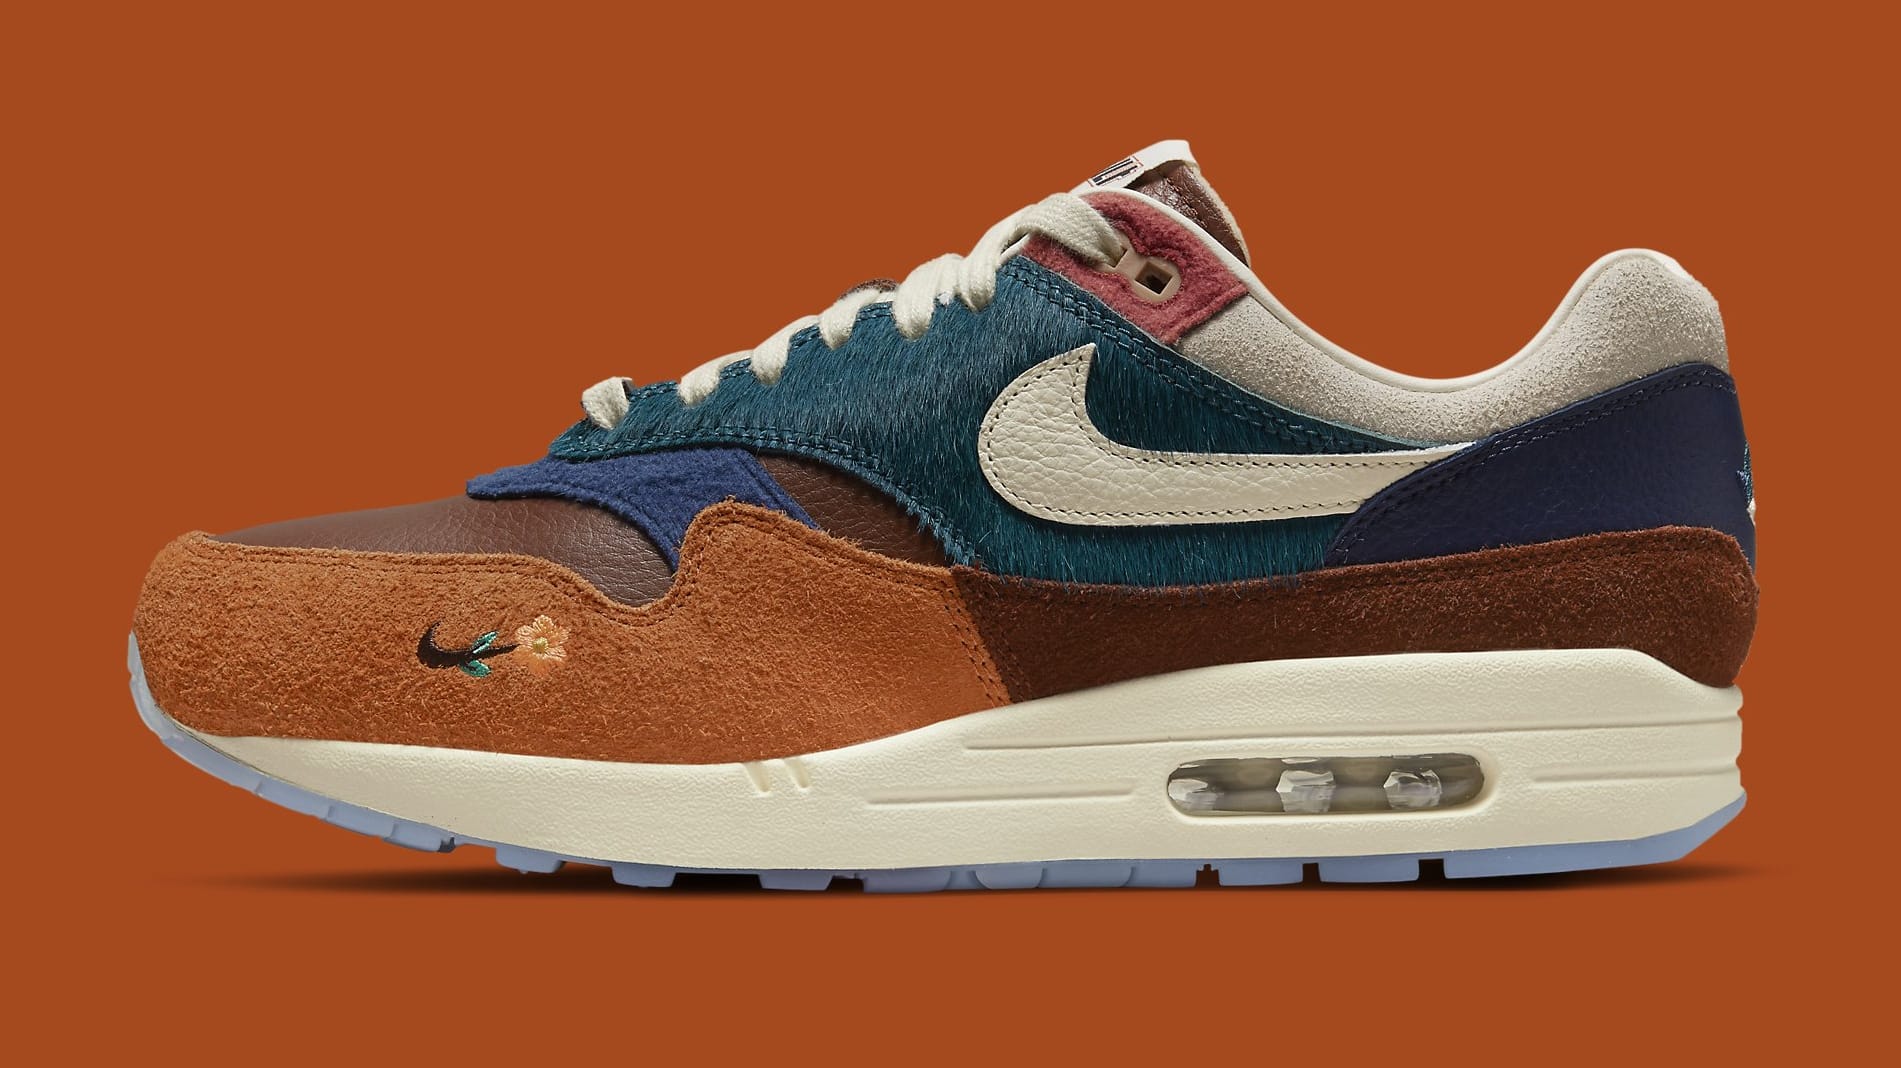 Kasina's Nike Air Max 1 Collabs Get an Official Release Date | Complex